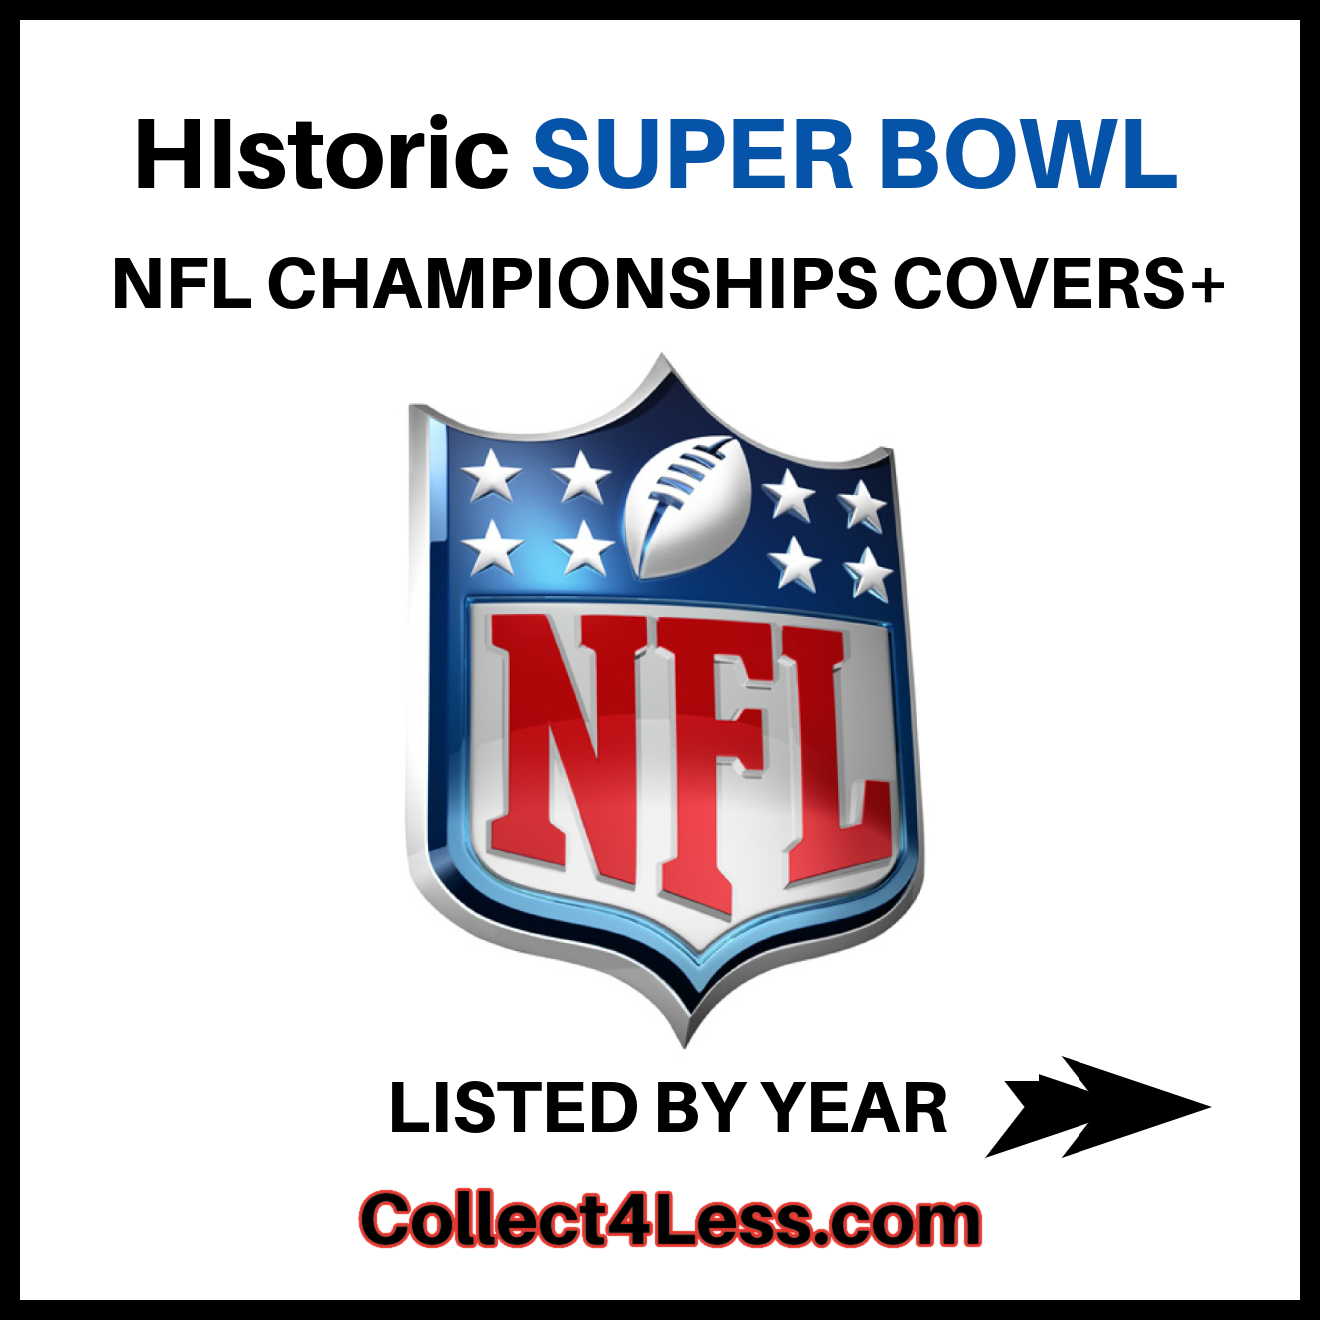 MFL CHAMPIONSHIP AND SUPERBOWL  POSTER & COVER GLOSSY PRINTS